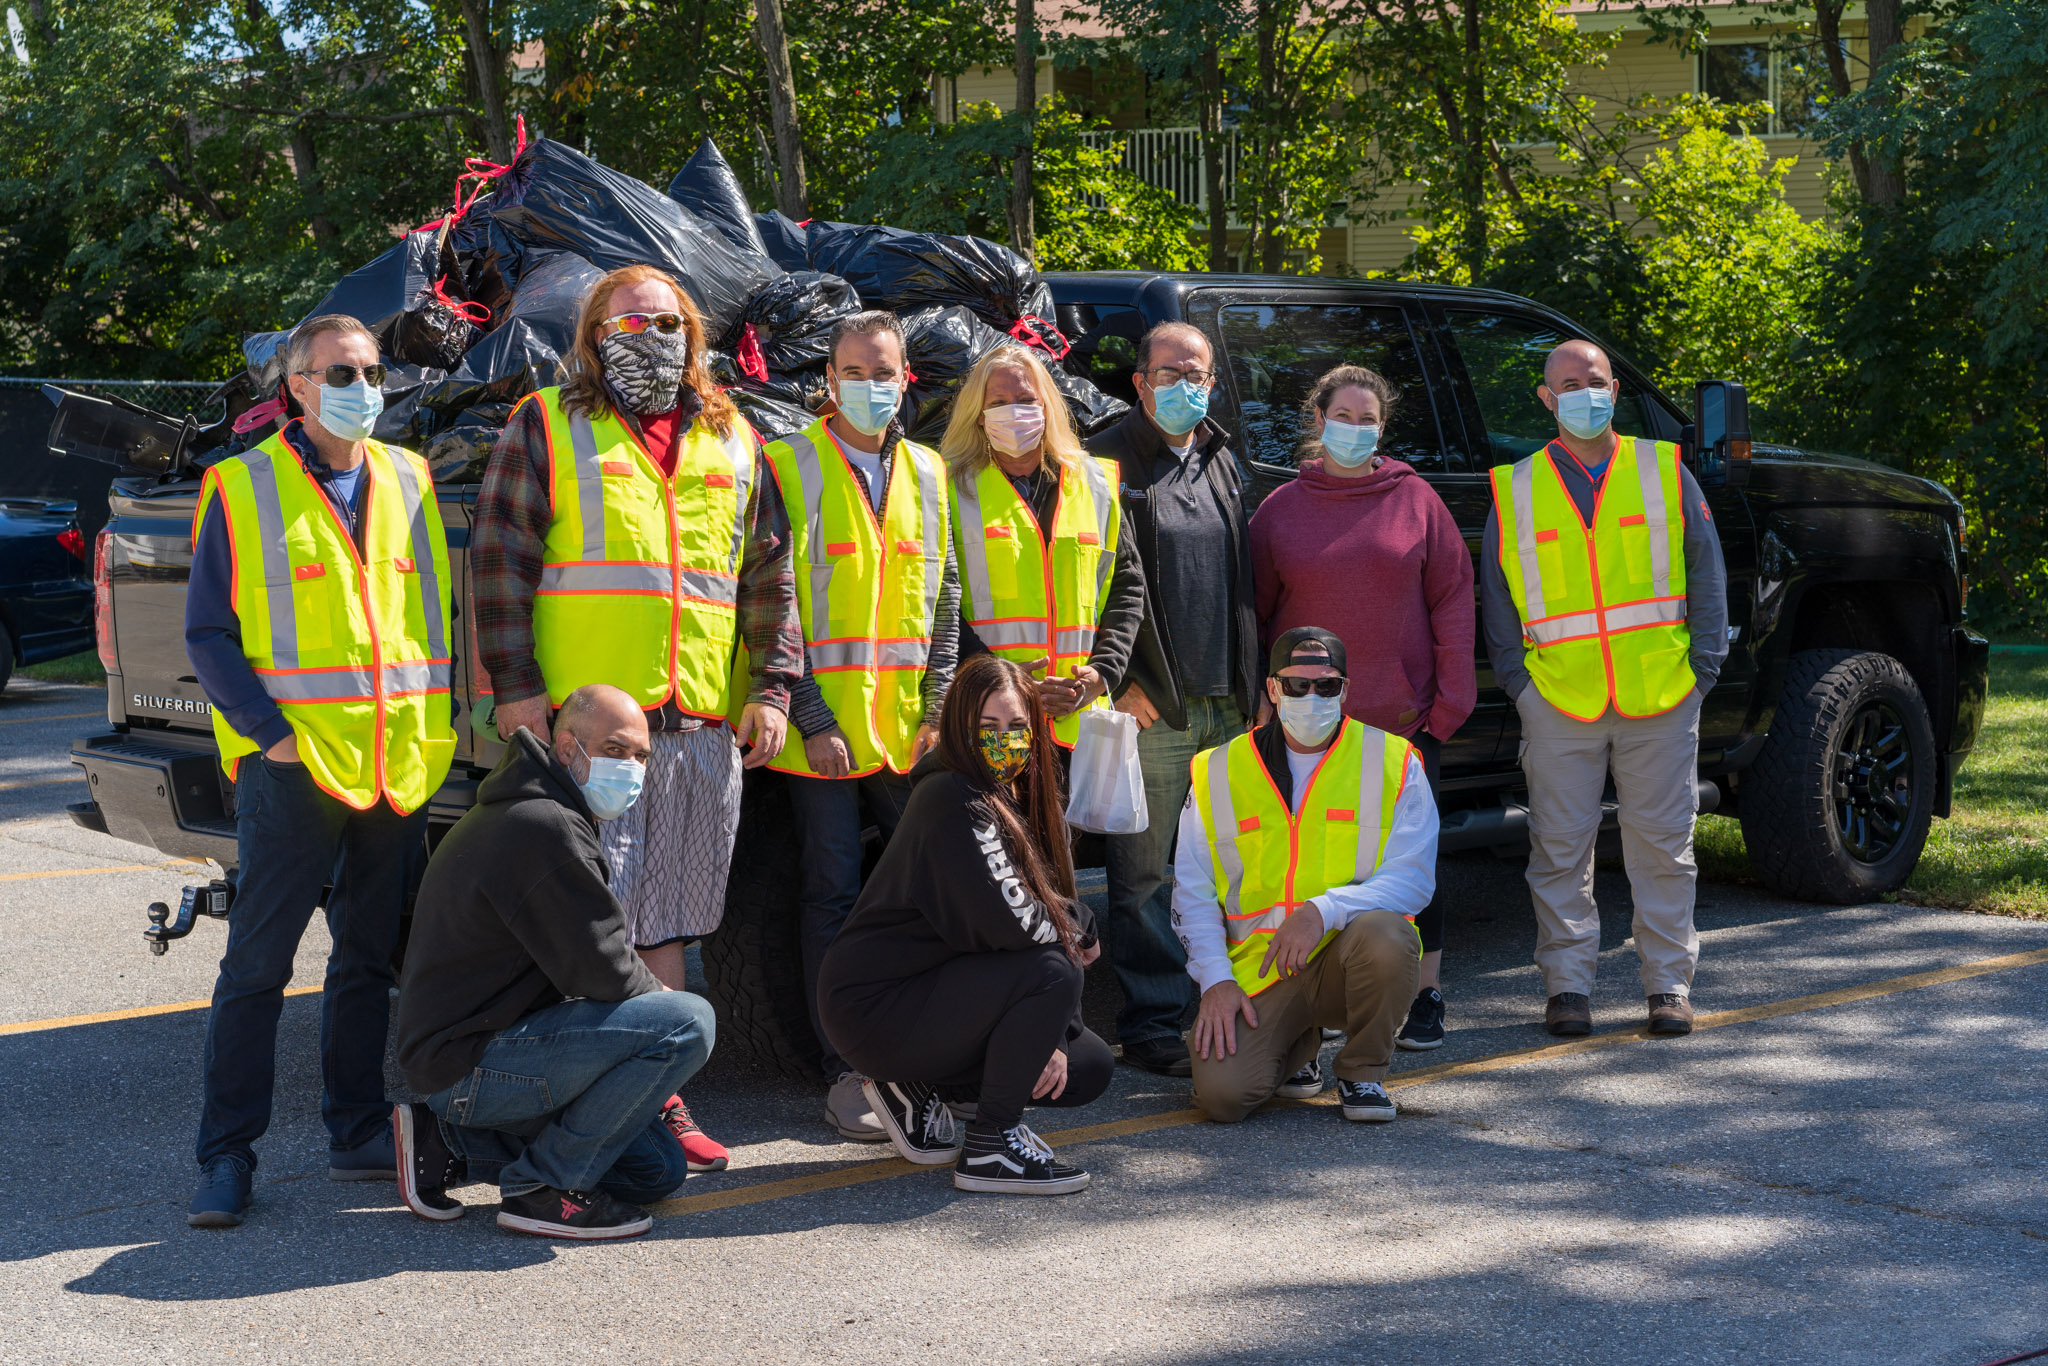 lazy river products annual broadway road cleanup dracut mass